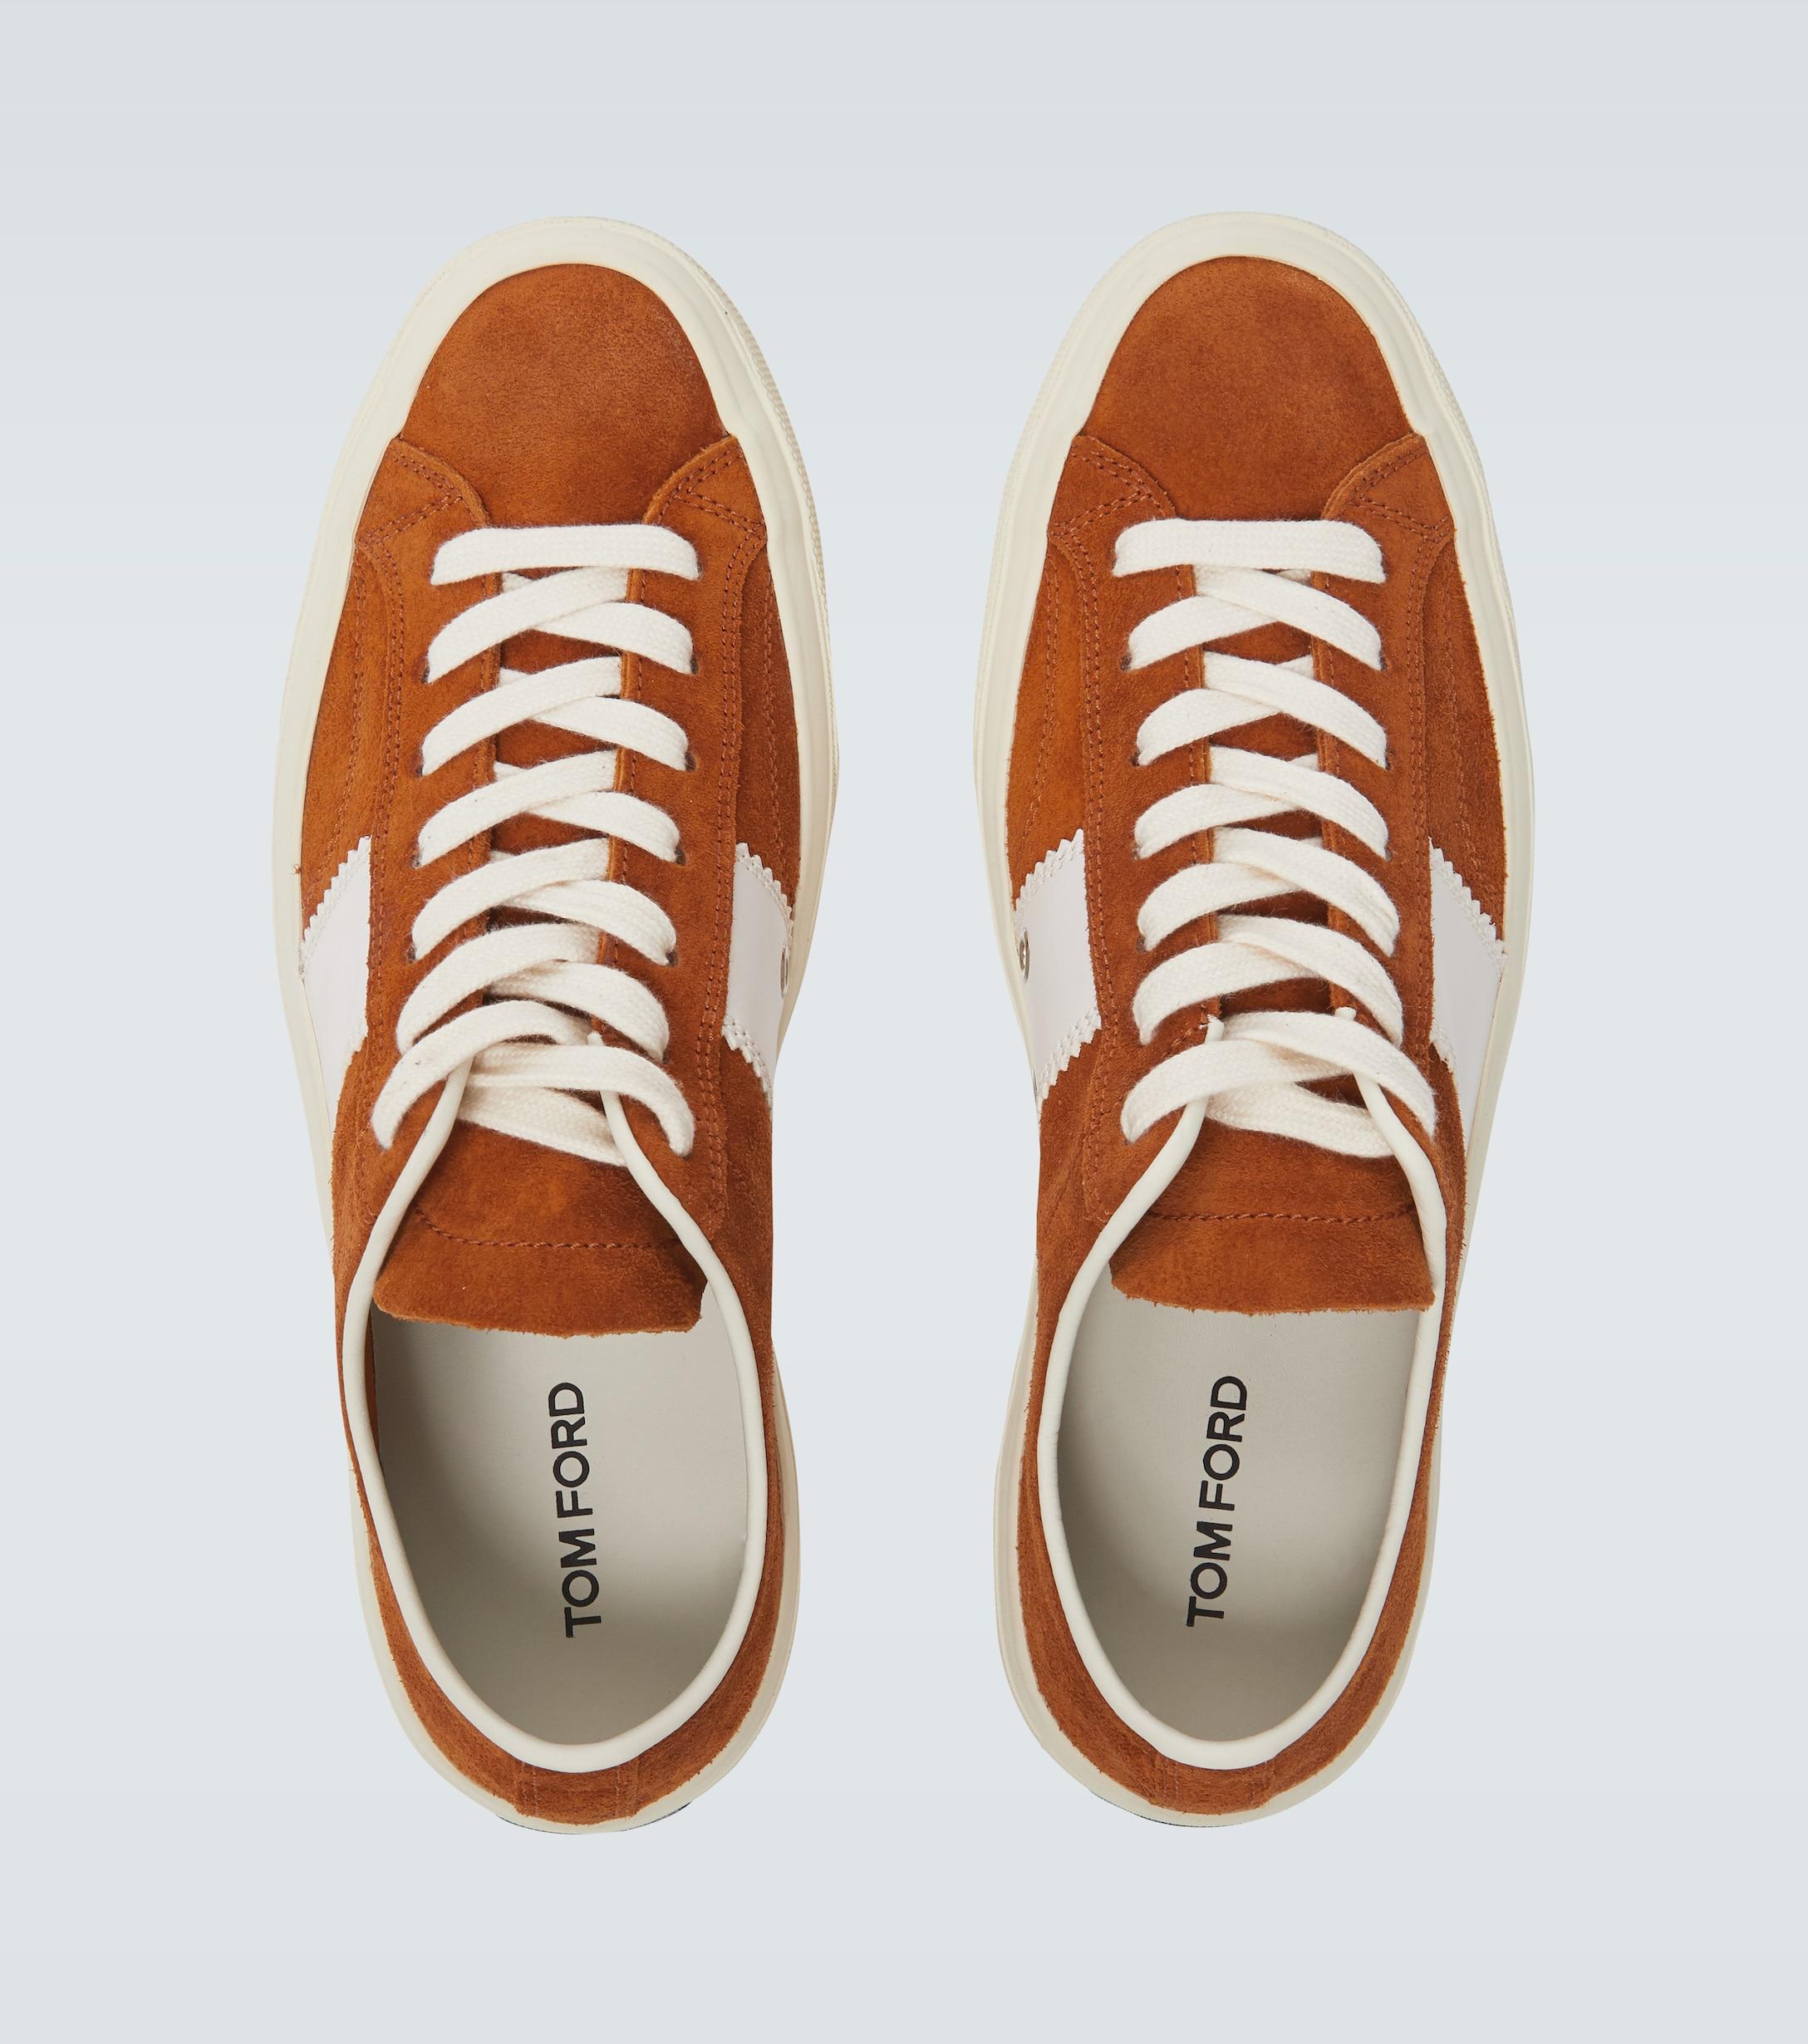 Tom Ford Cambridge Suede Sneakers in Orange for Men - Lyst